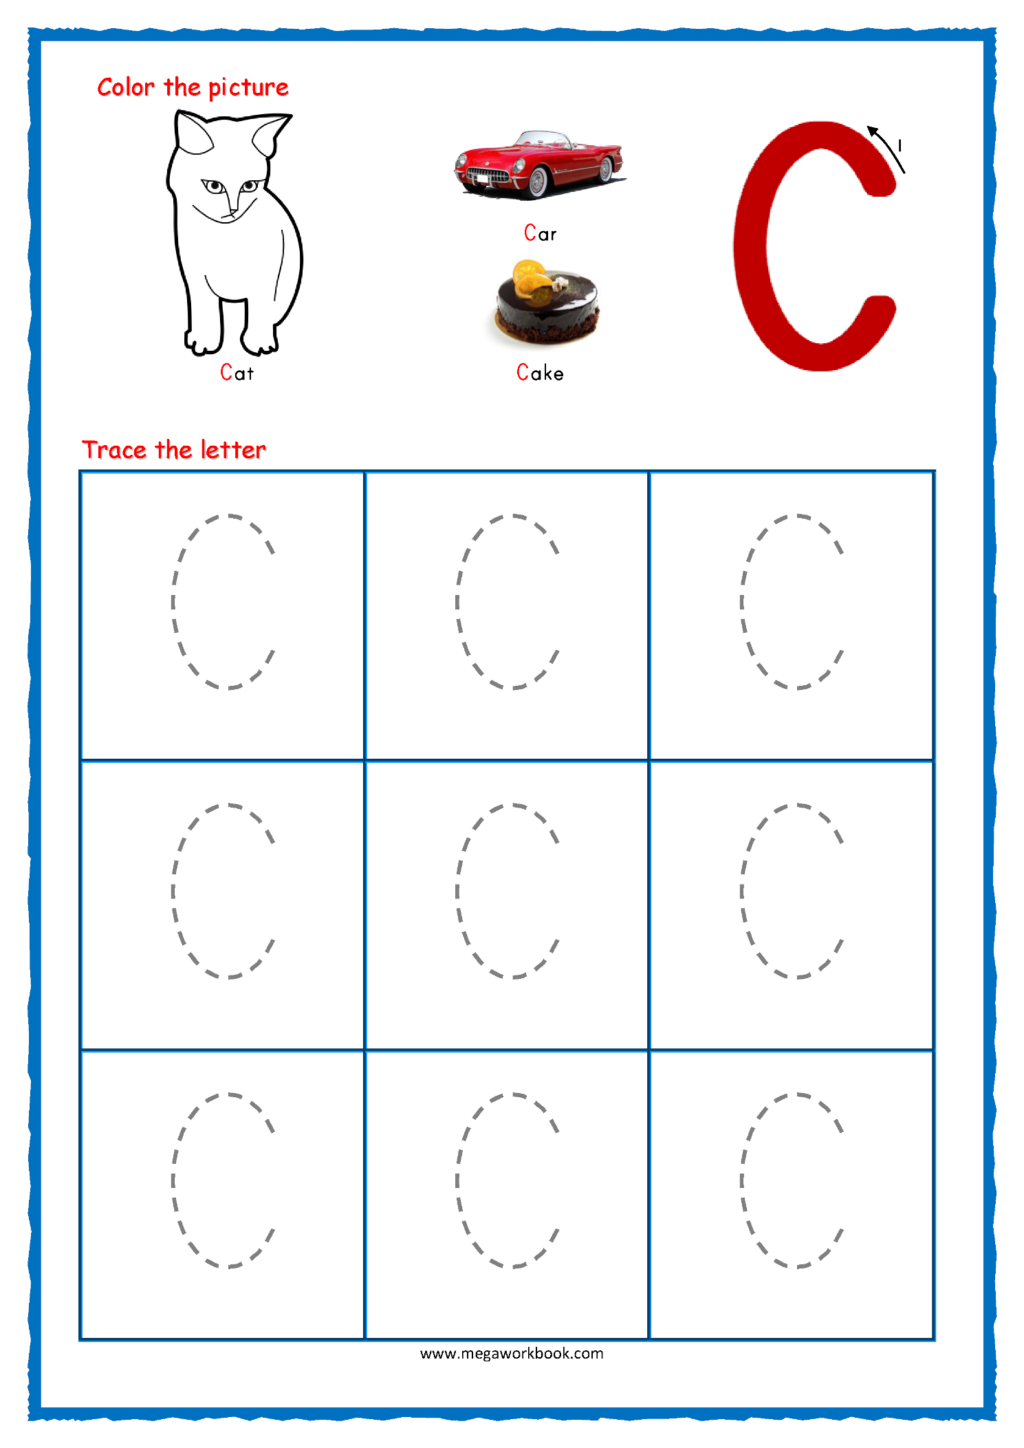 Worksheet ~ Capital Letter Tracing With Crayons 03 Alphabet with regard to Letter C Tracing Worksheets Pdf